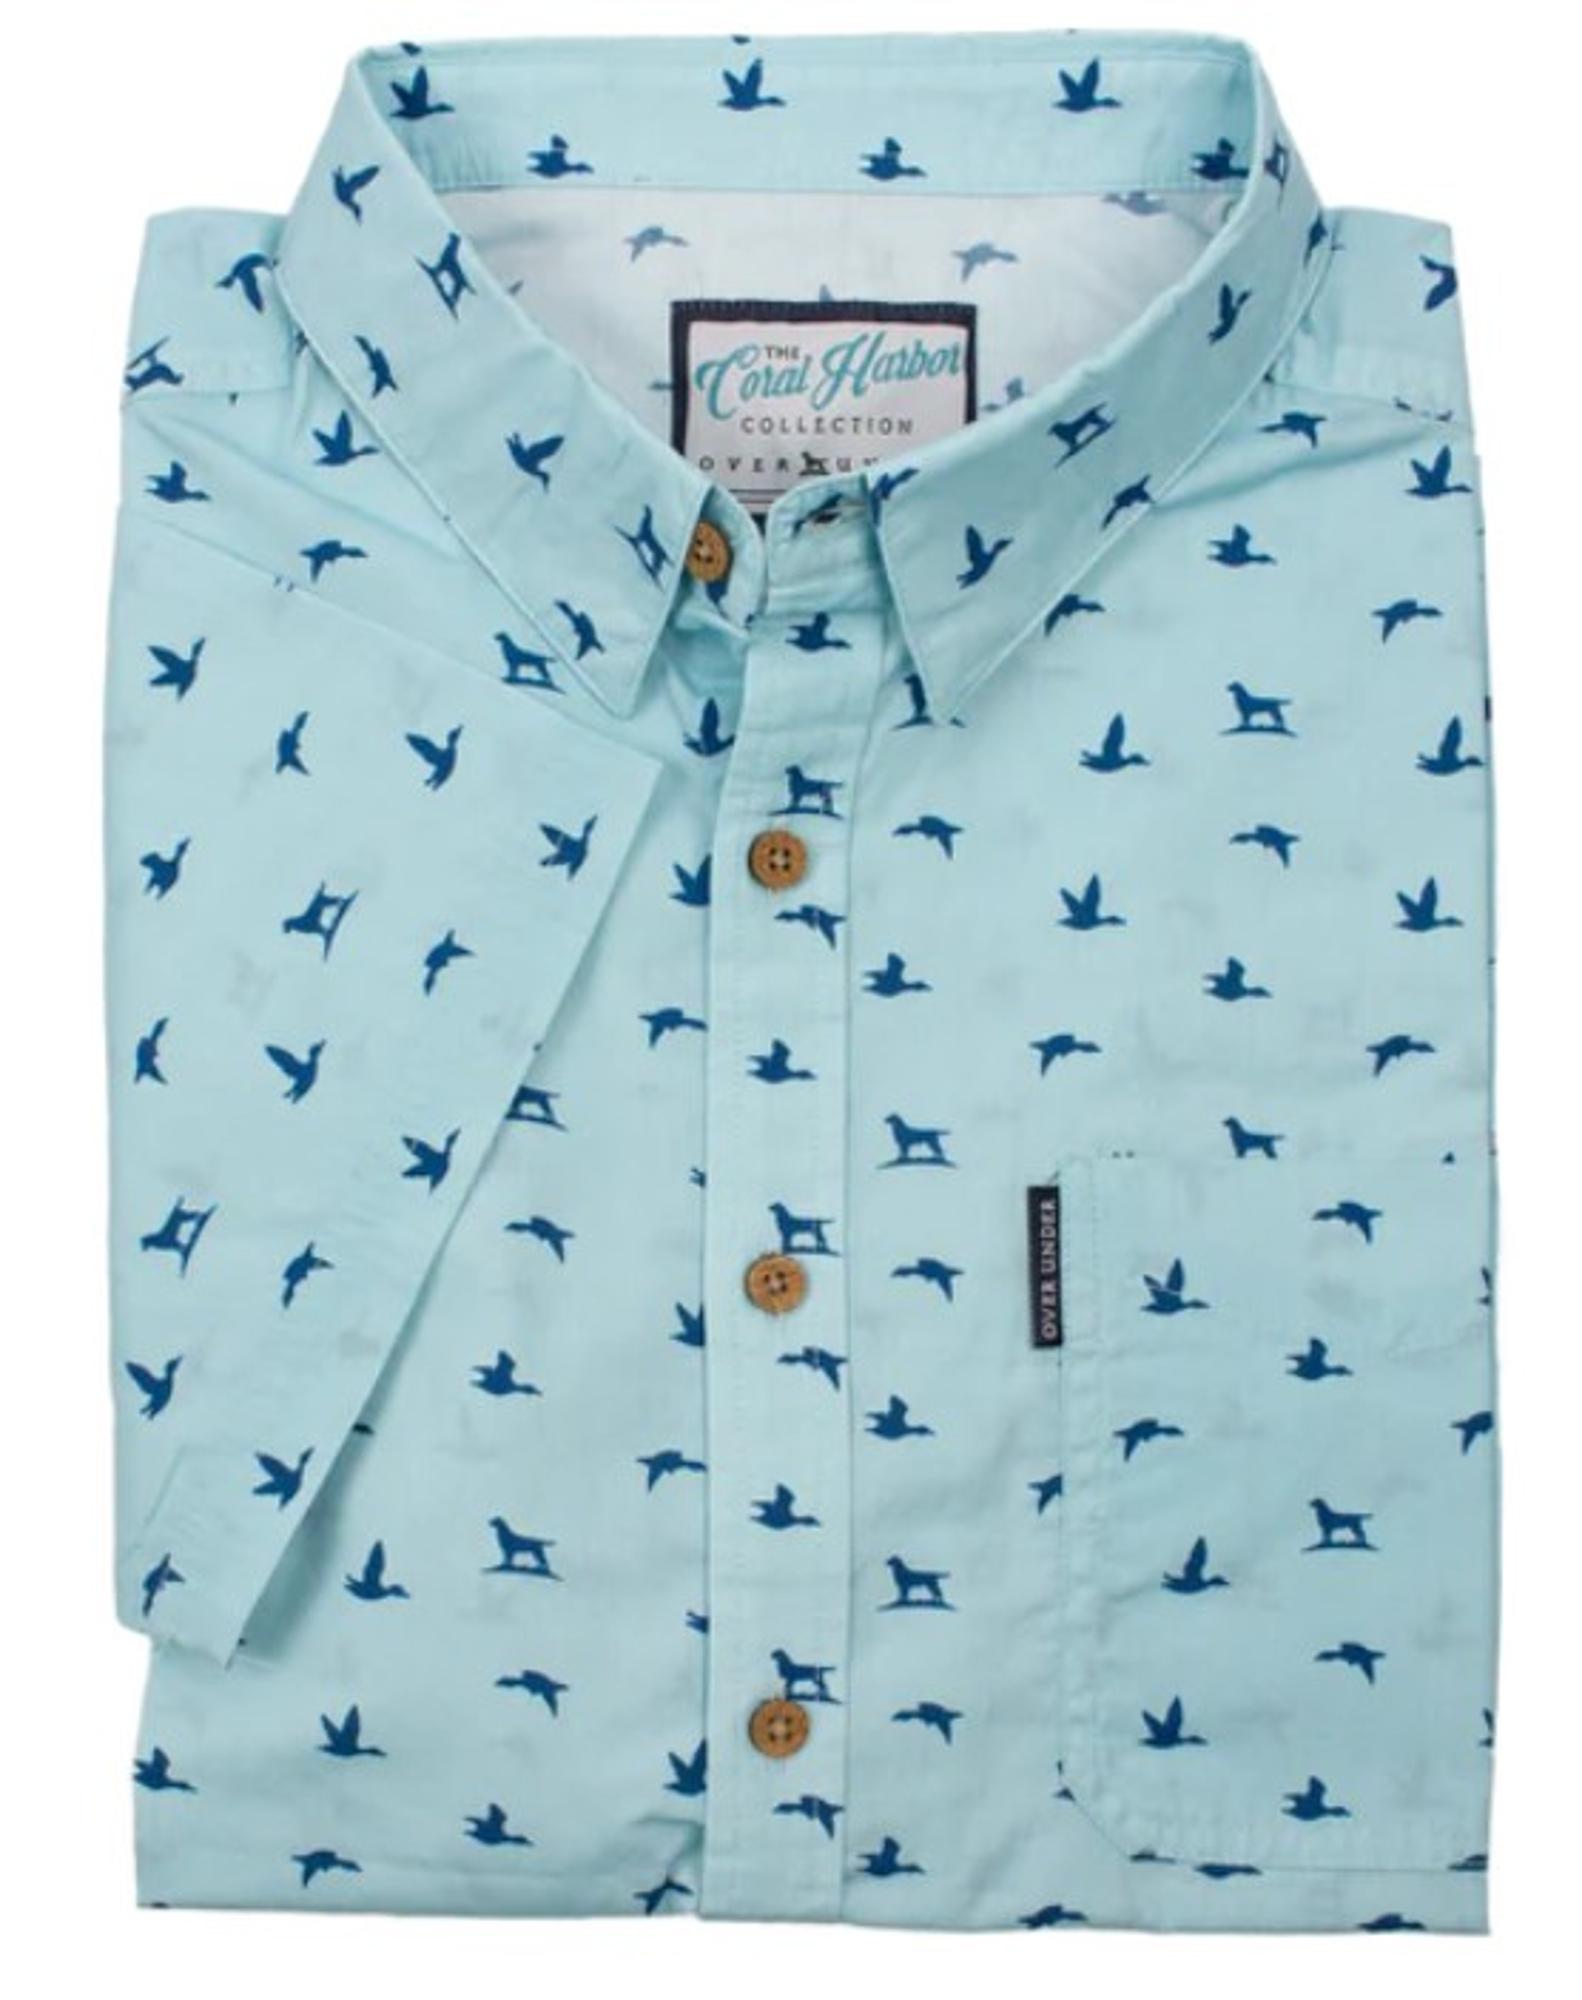 Coral Harbor Flight's Grounded Shirt